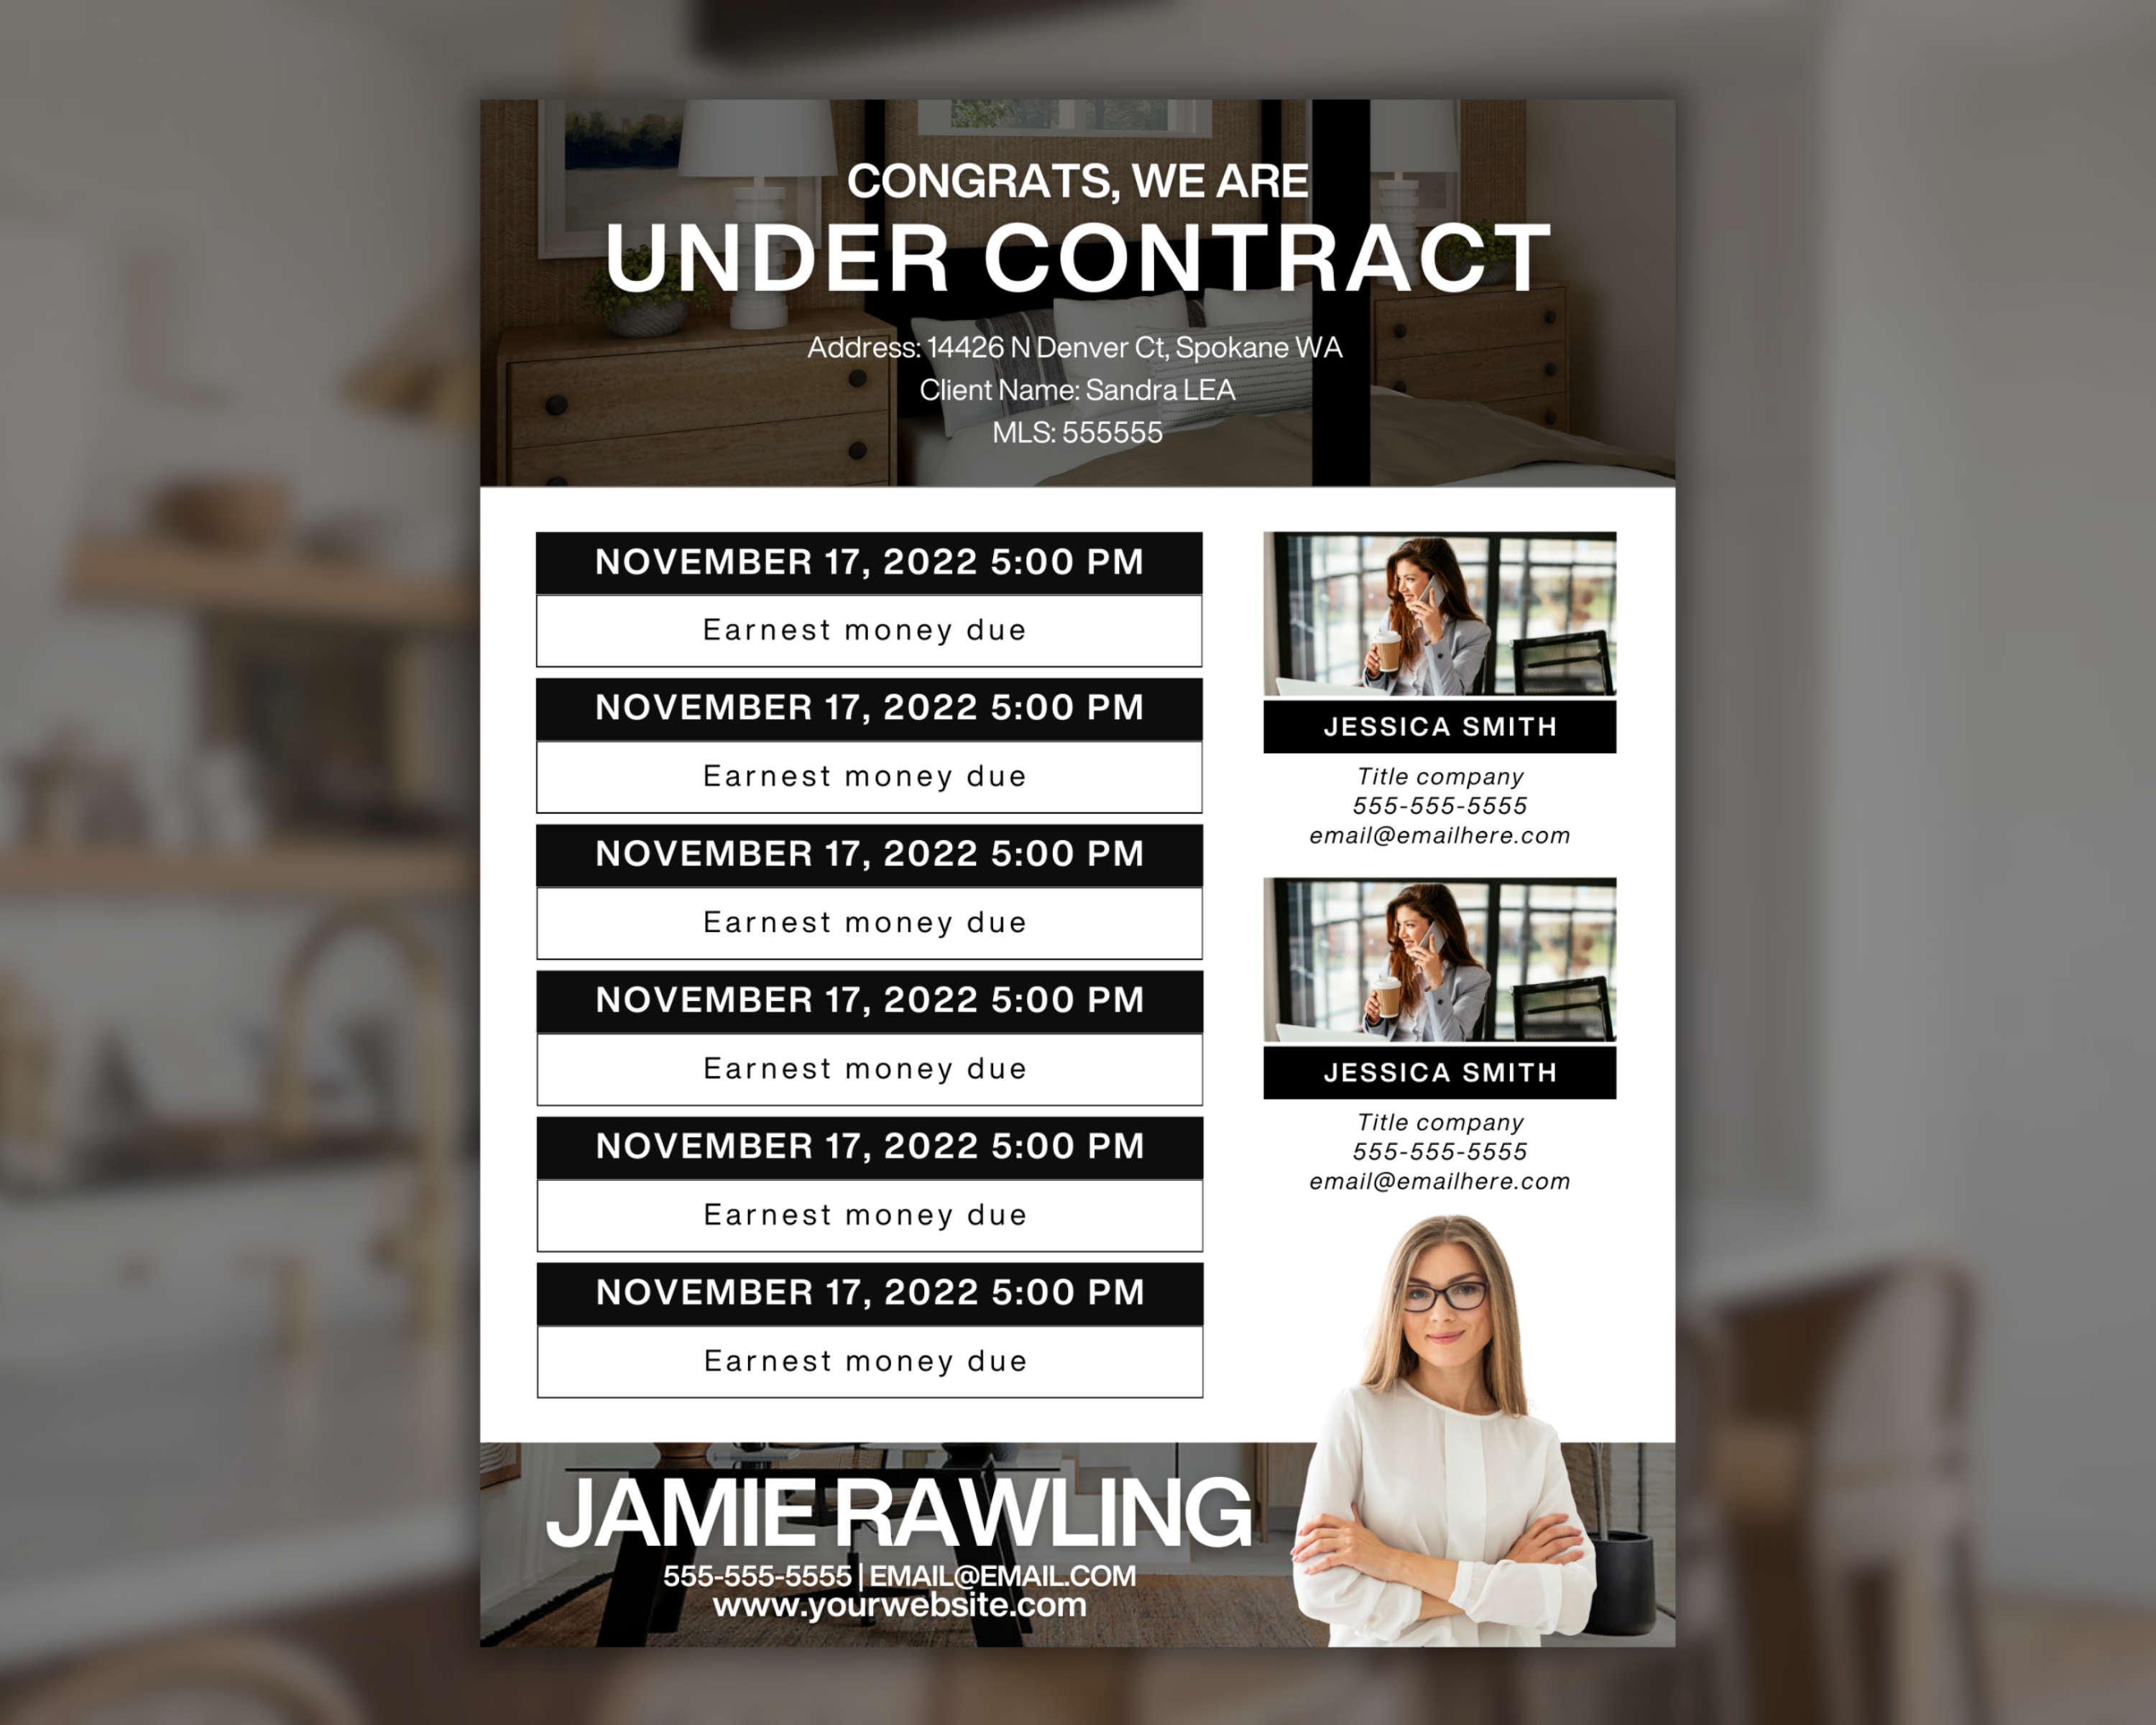 Real Estate Transaction Summary Flyer, Under Contract Timeline, Realtor Marketing, Transaction Coordinator Summary, Real Estate Template